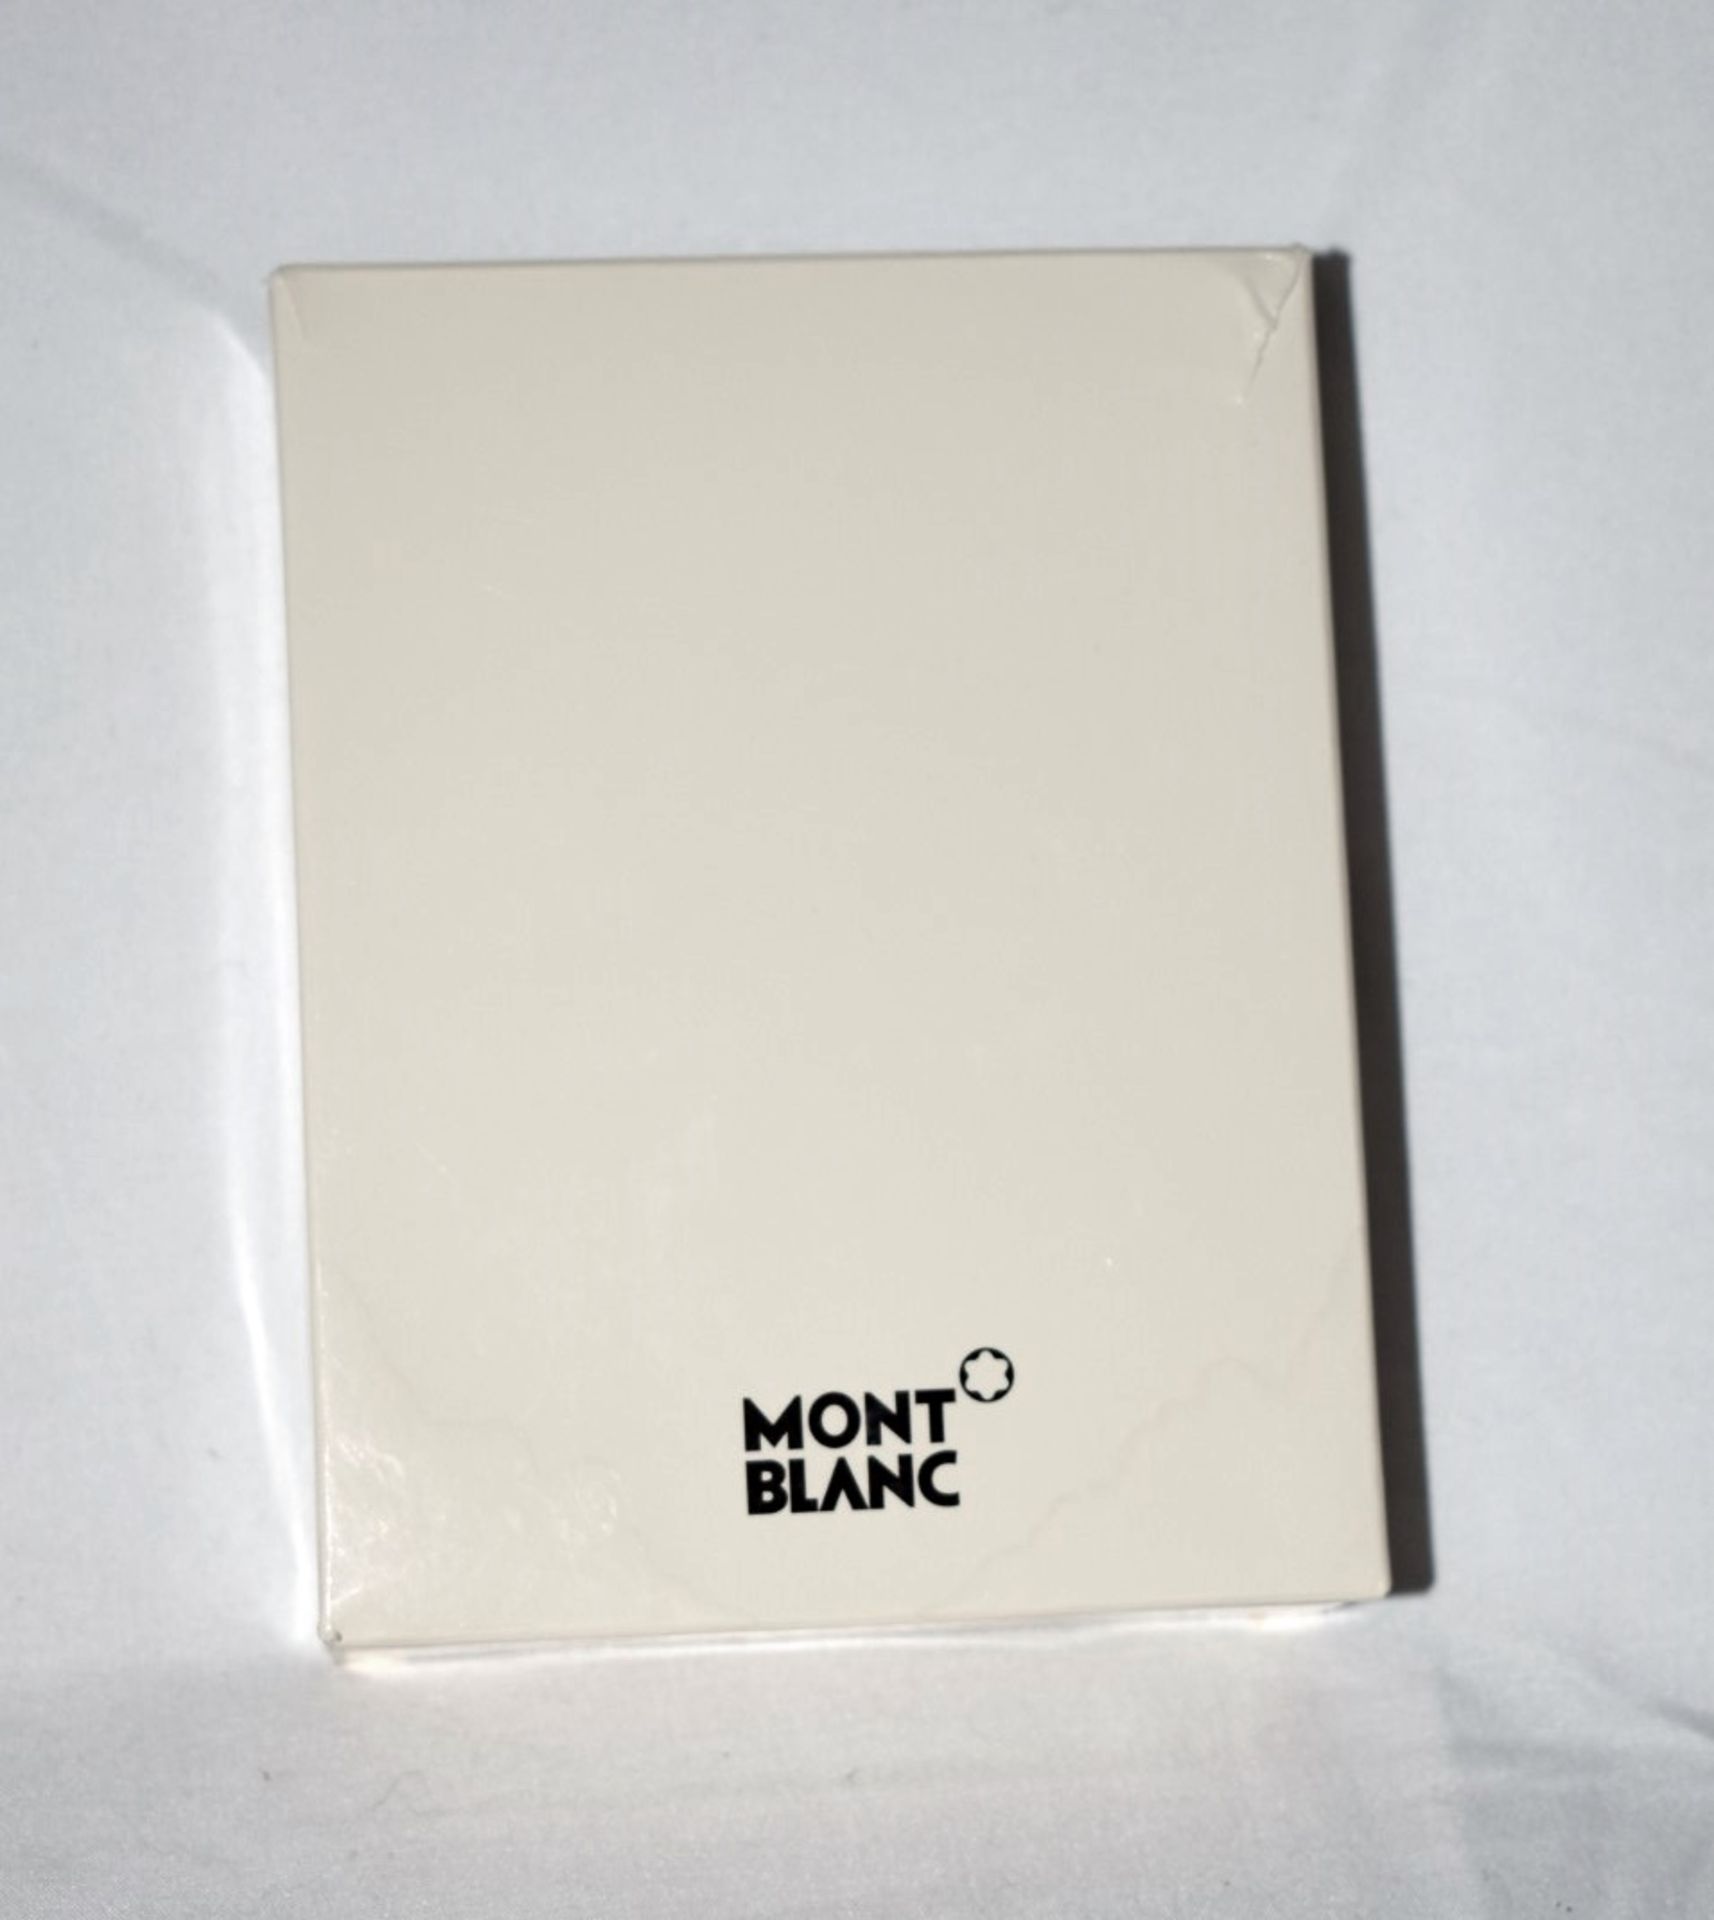 1 x MONTBLANC Sartorial Blue Luxury Leather Card Holder - Original Price £160.00 - Boxed Stock - Image 9 of 10